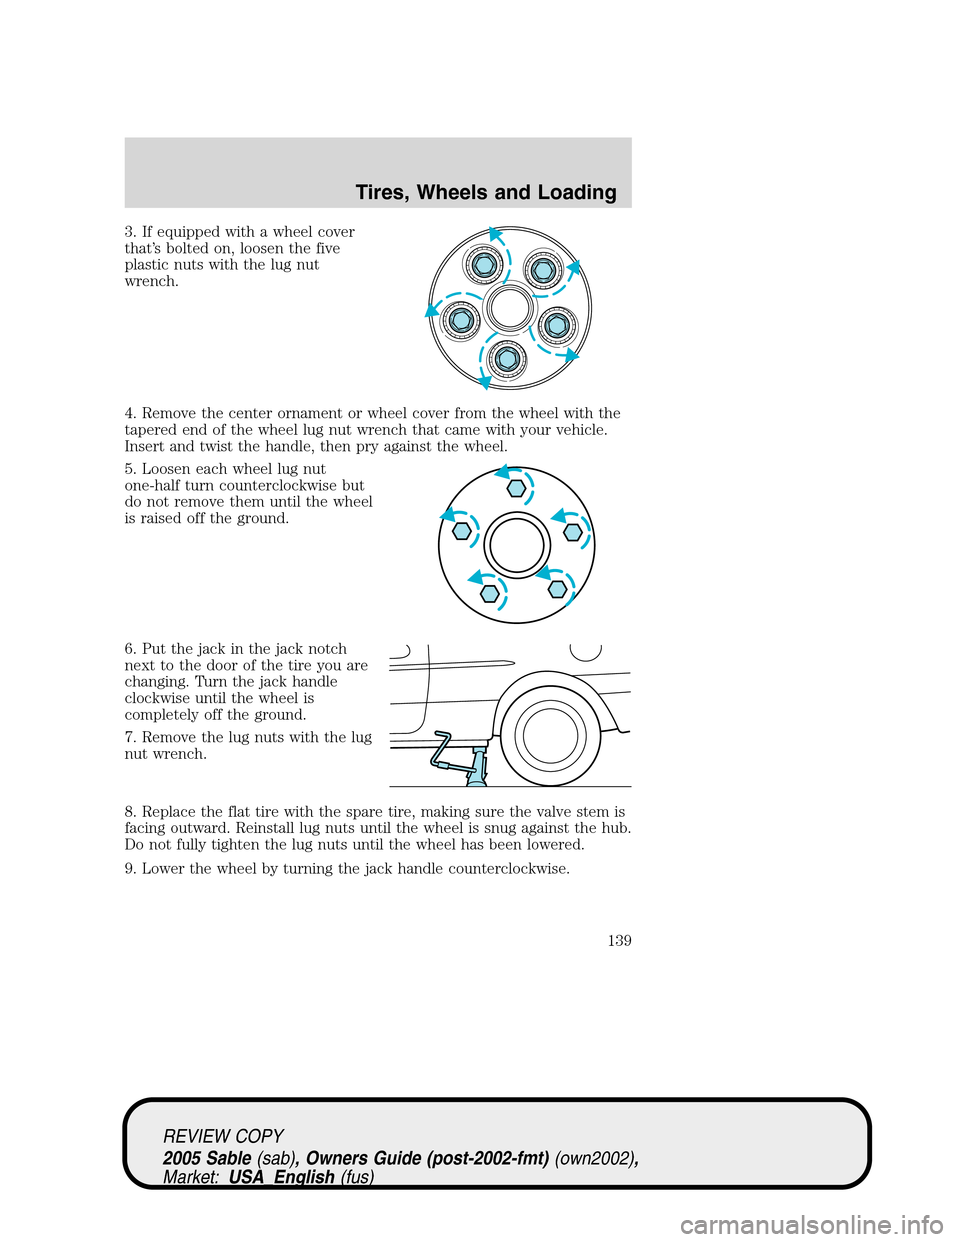 Mercury Sable 2005  Owners Manuals 3. If equipped with a wheel cover
that’s bolted on, loosen the five
plastic nuts with the lug nut
wrench.
4. Remove the center ornament or wheel cover from the wheel with the
tapered end of the whee